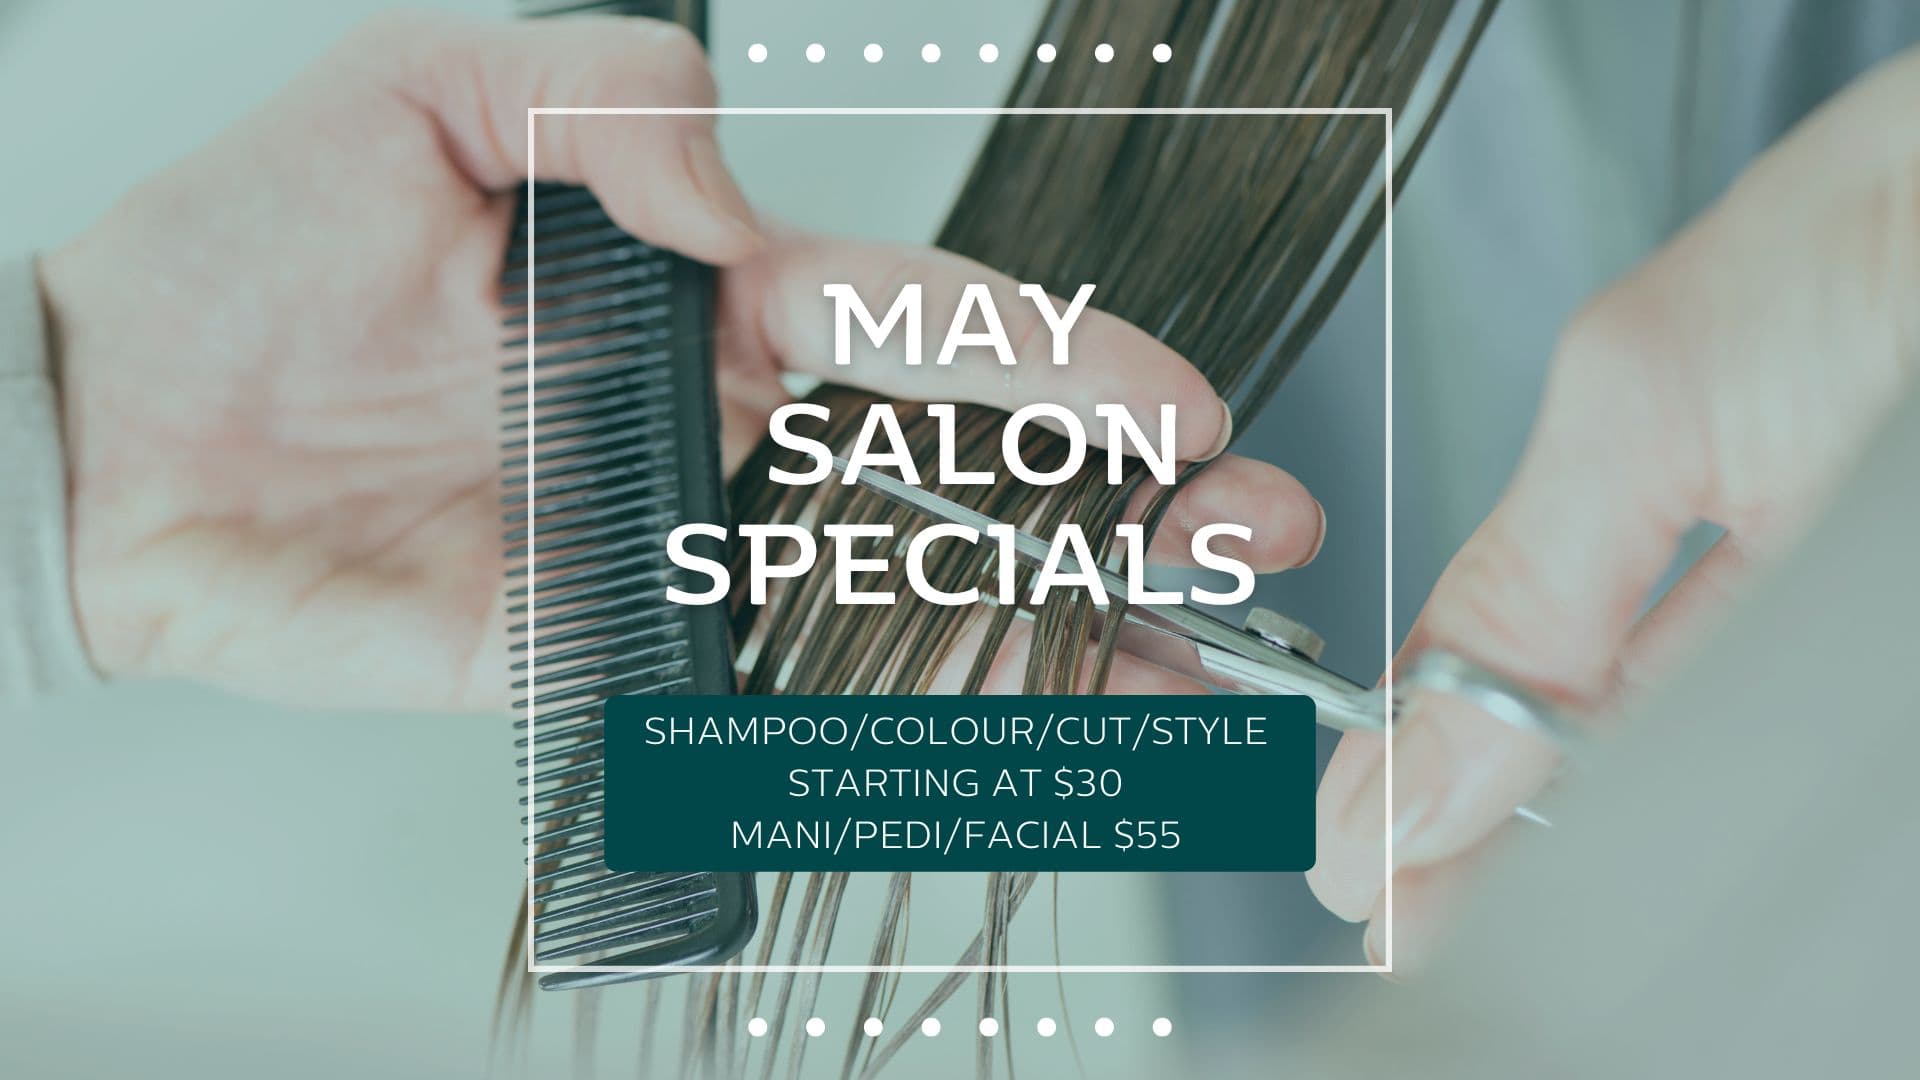 Featured image for https://www.cbbccareercollege.ca/upcoming-events/may-salon-specials-shampoo-cut-colour-style-starting-at-30-and-mani-pedi-facial-55/ event